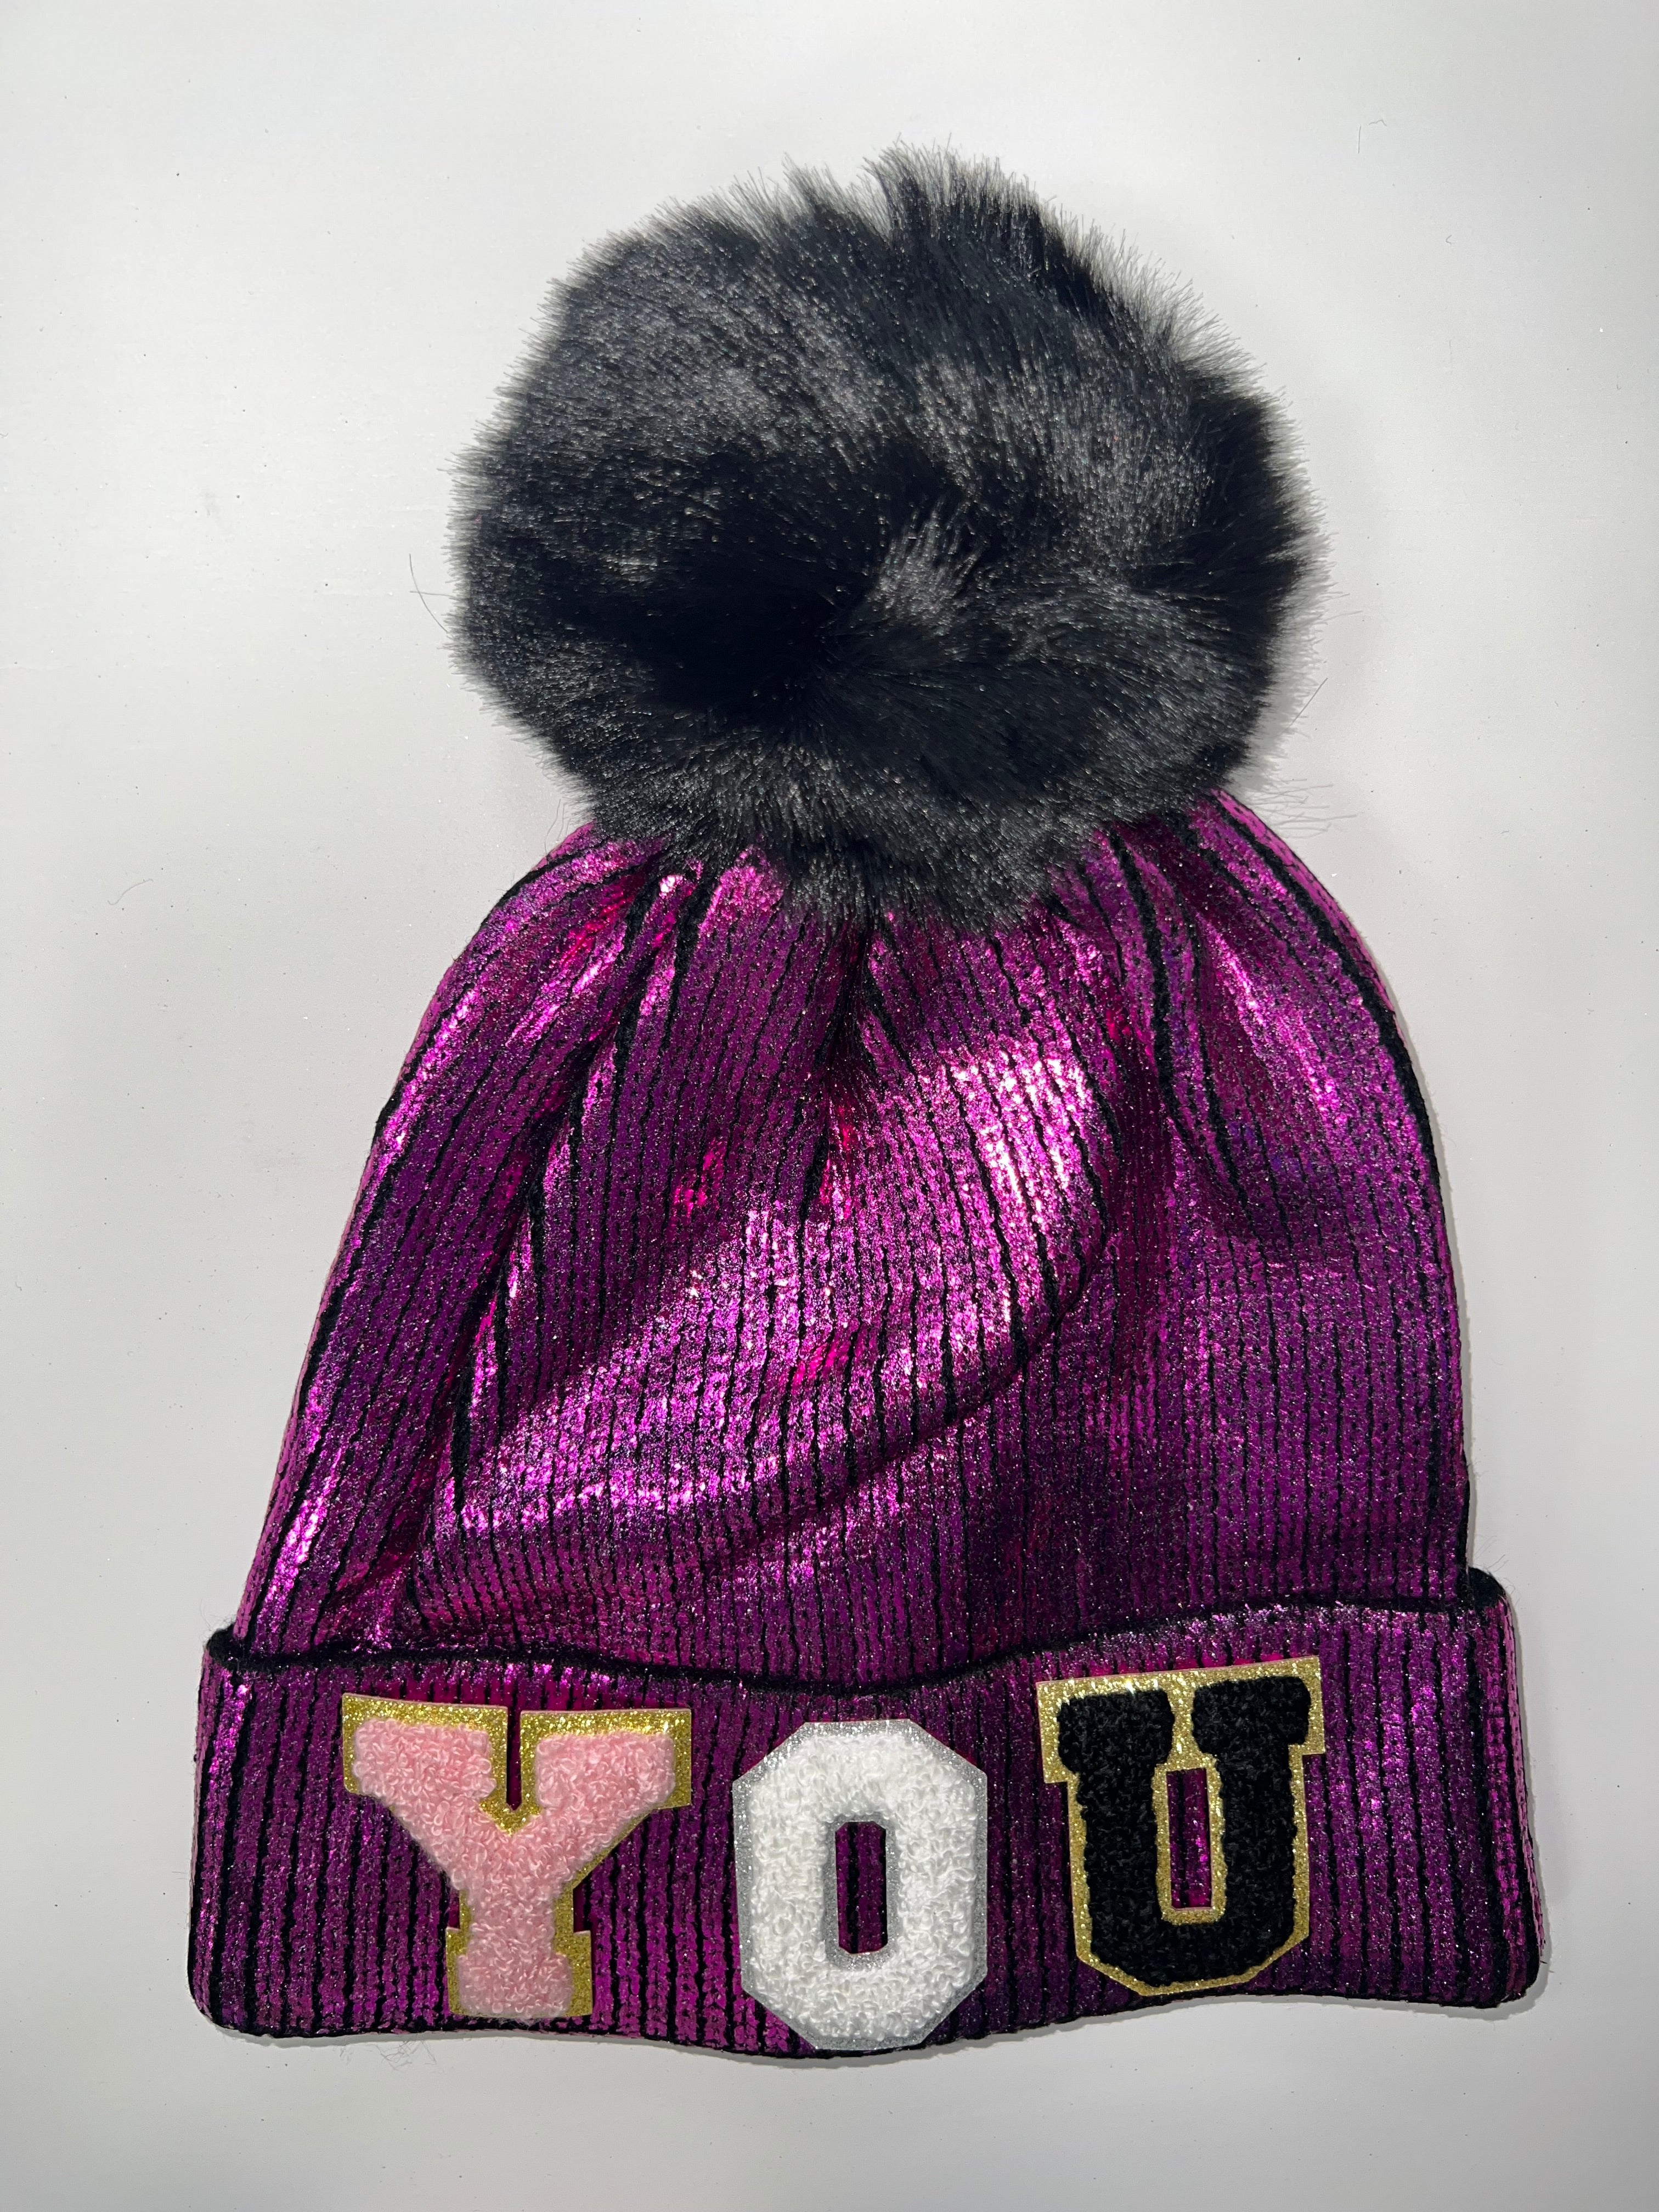 The Pom Pom Winter Hat  - Pink Letters / Initials